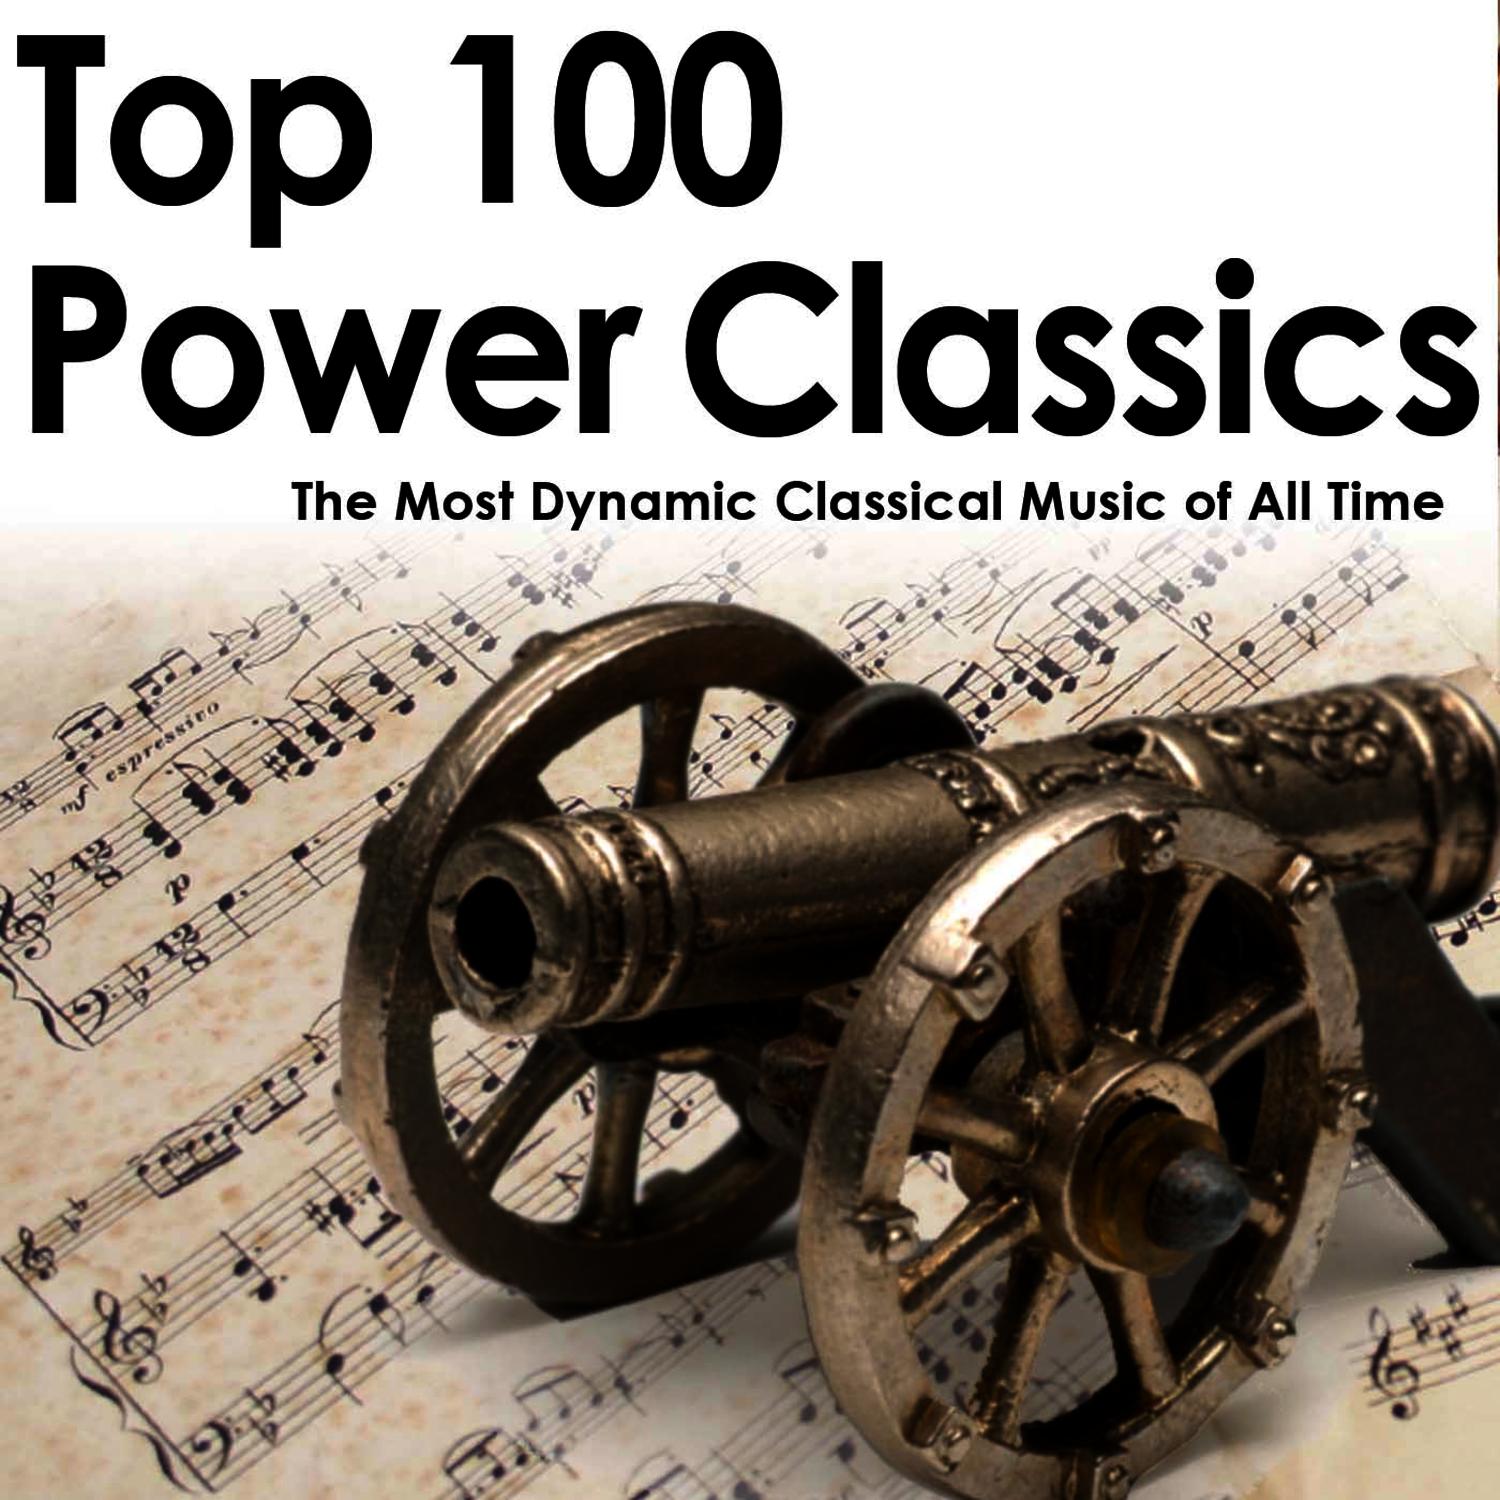 Top 100 Power Classics: The Most Dynamic Classical Music of All Time